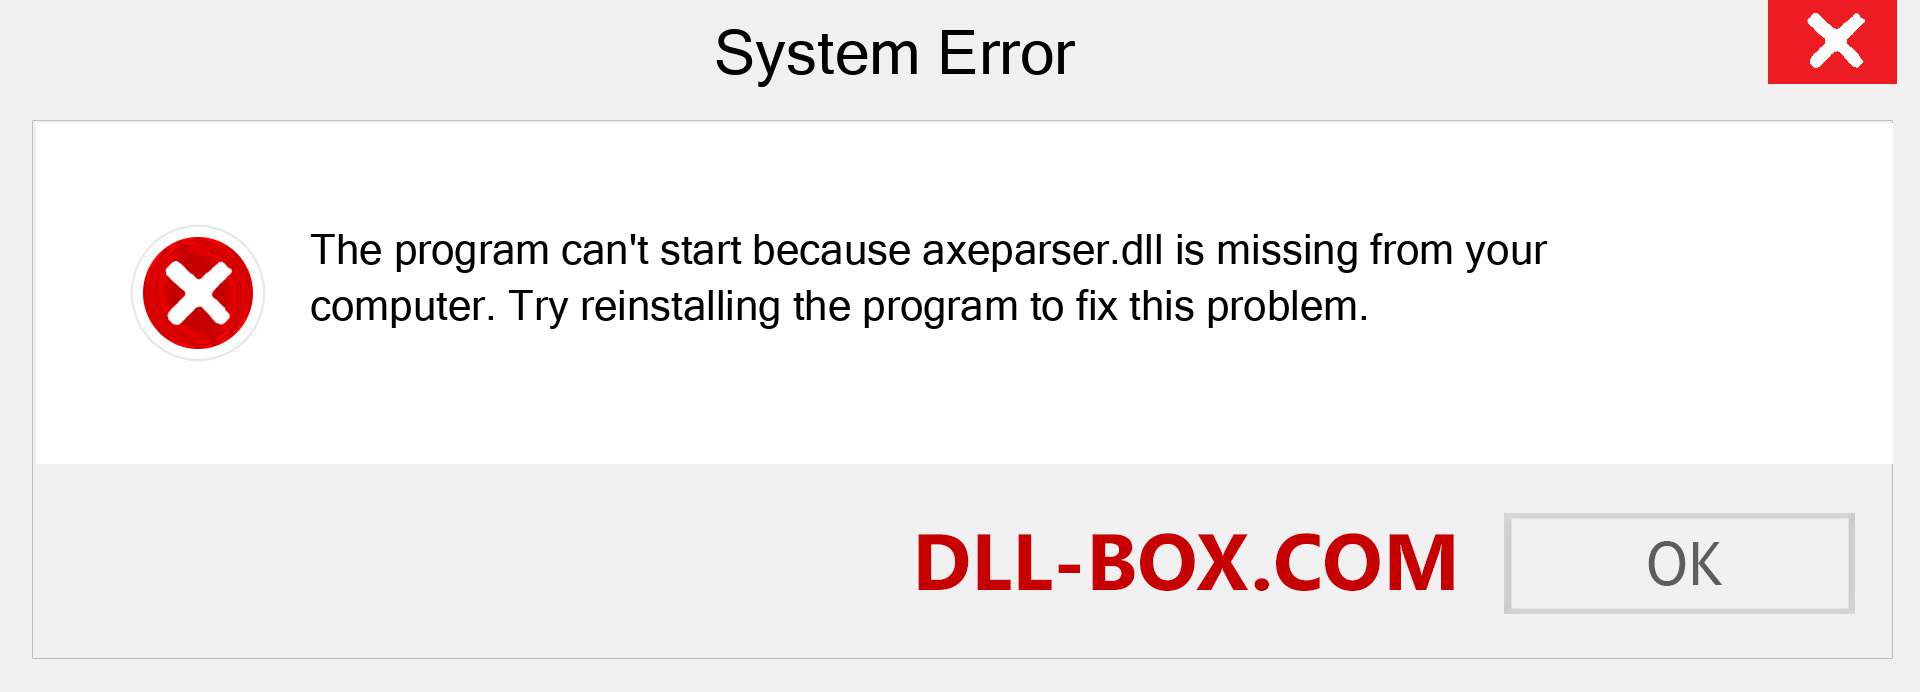  axeparser.dll file is missing?. Download for Windows 7, 8, 10 - Fix  axeparser dll Missing Error on Windows, photos, images